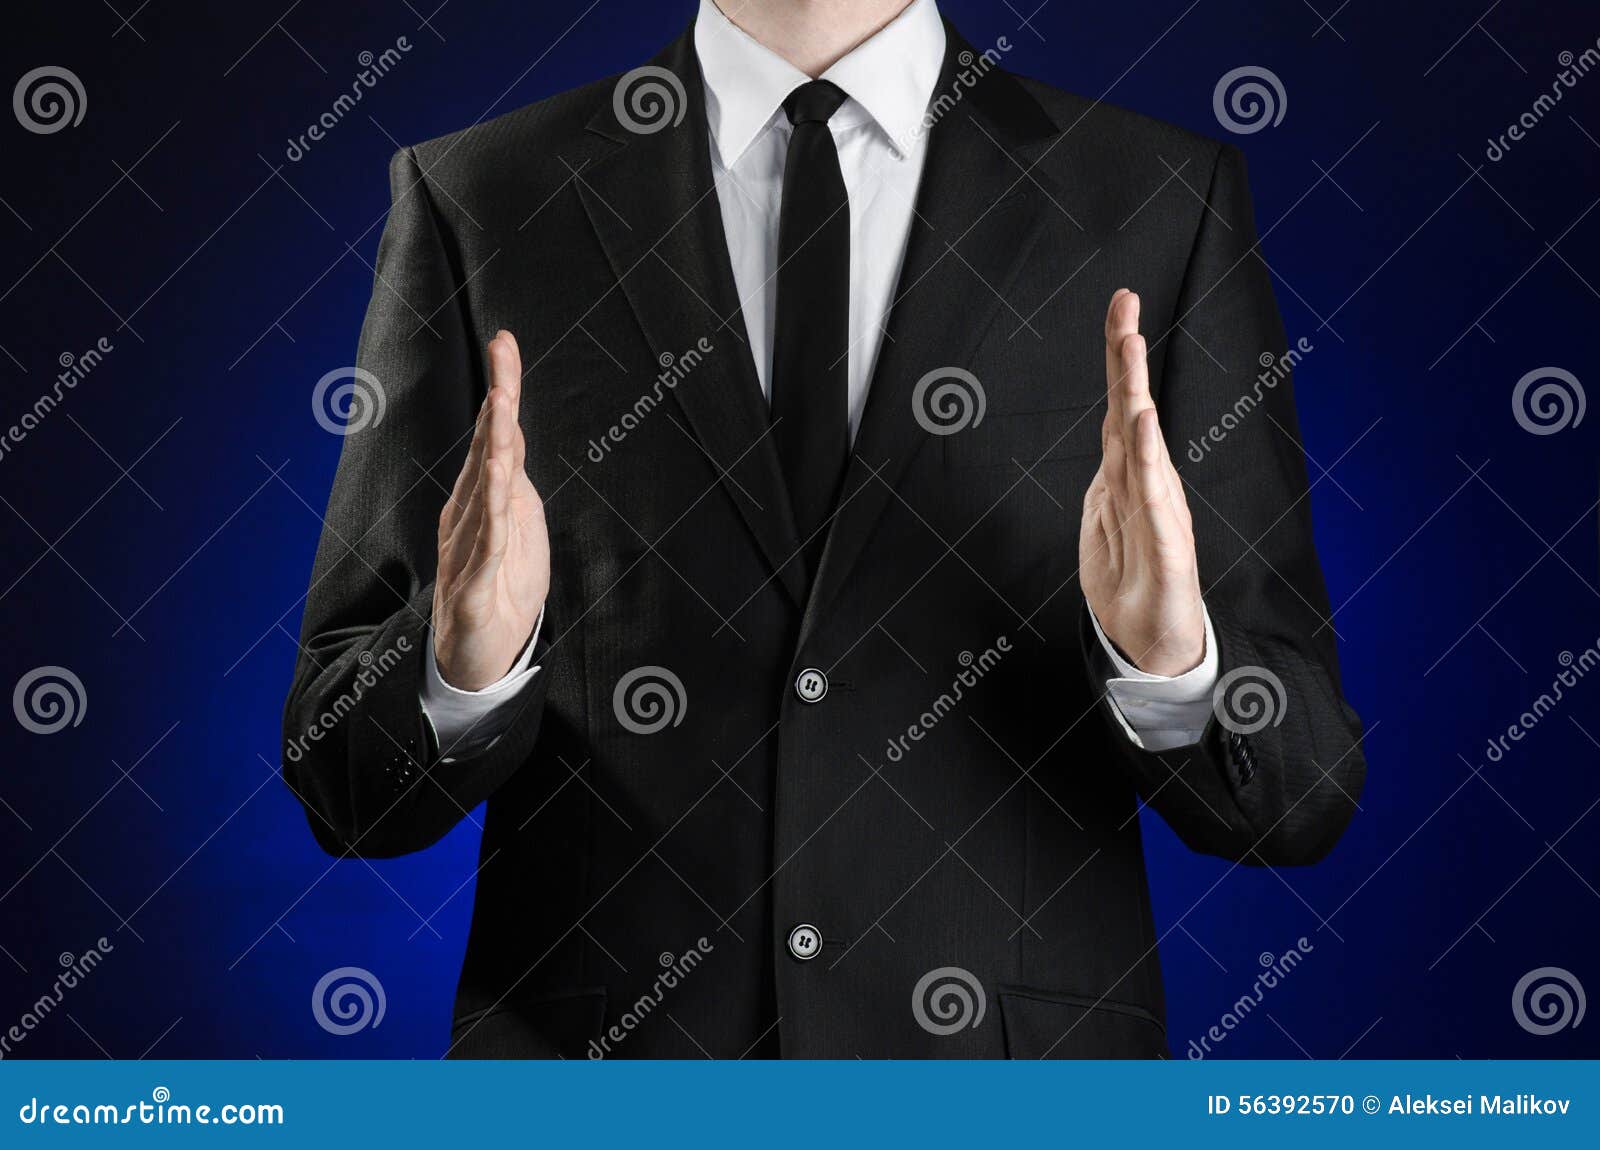 businessman and gesture topic: a man in a black suit and white shirt showing gestures with hands on a dark blue background in stud